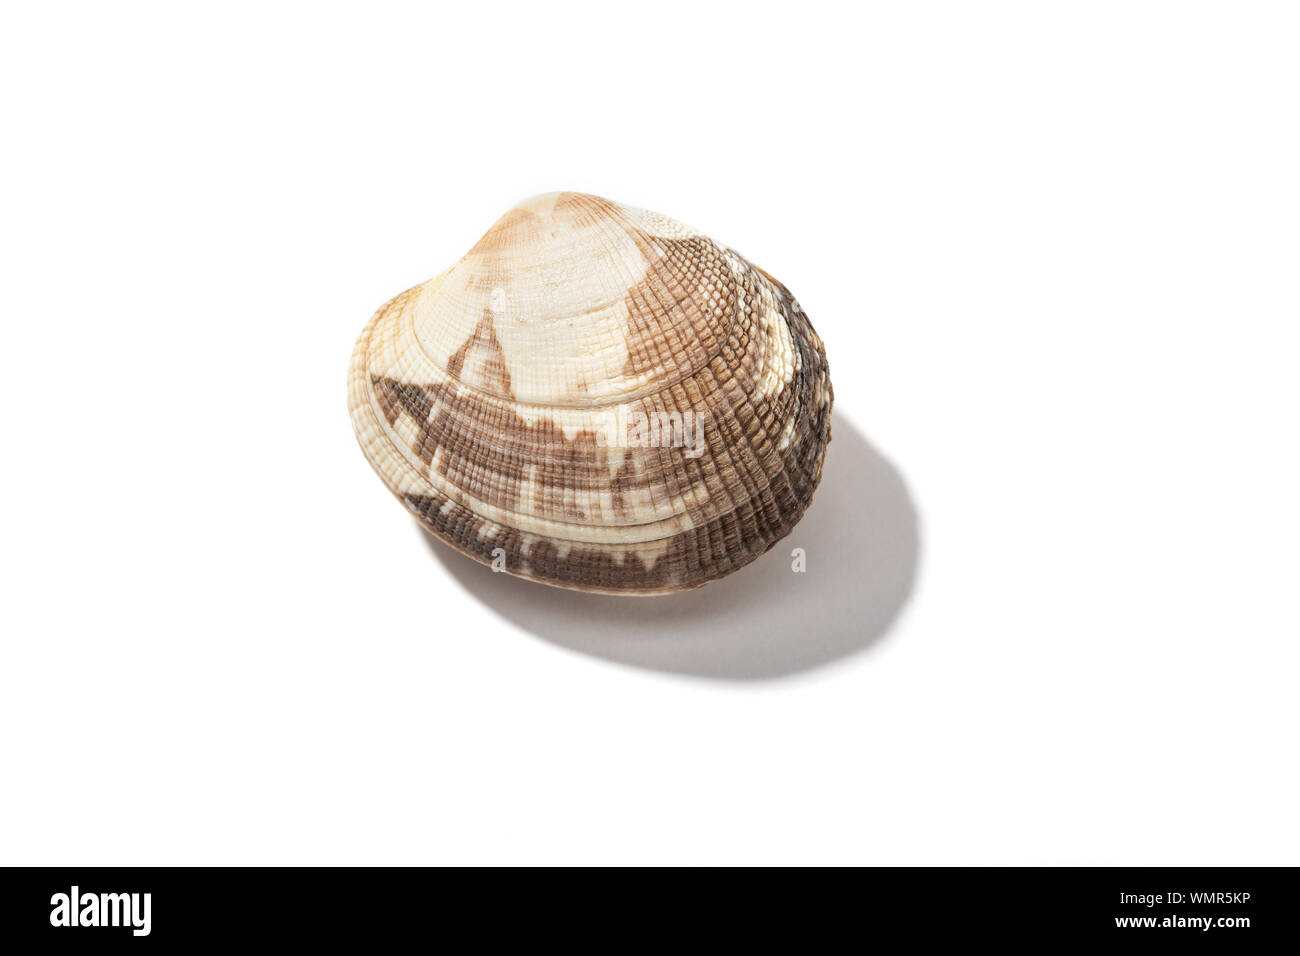 Fresh clam isolated on white background. Edible mollusk from Galicia, Spain Stock Photo